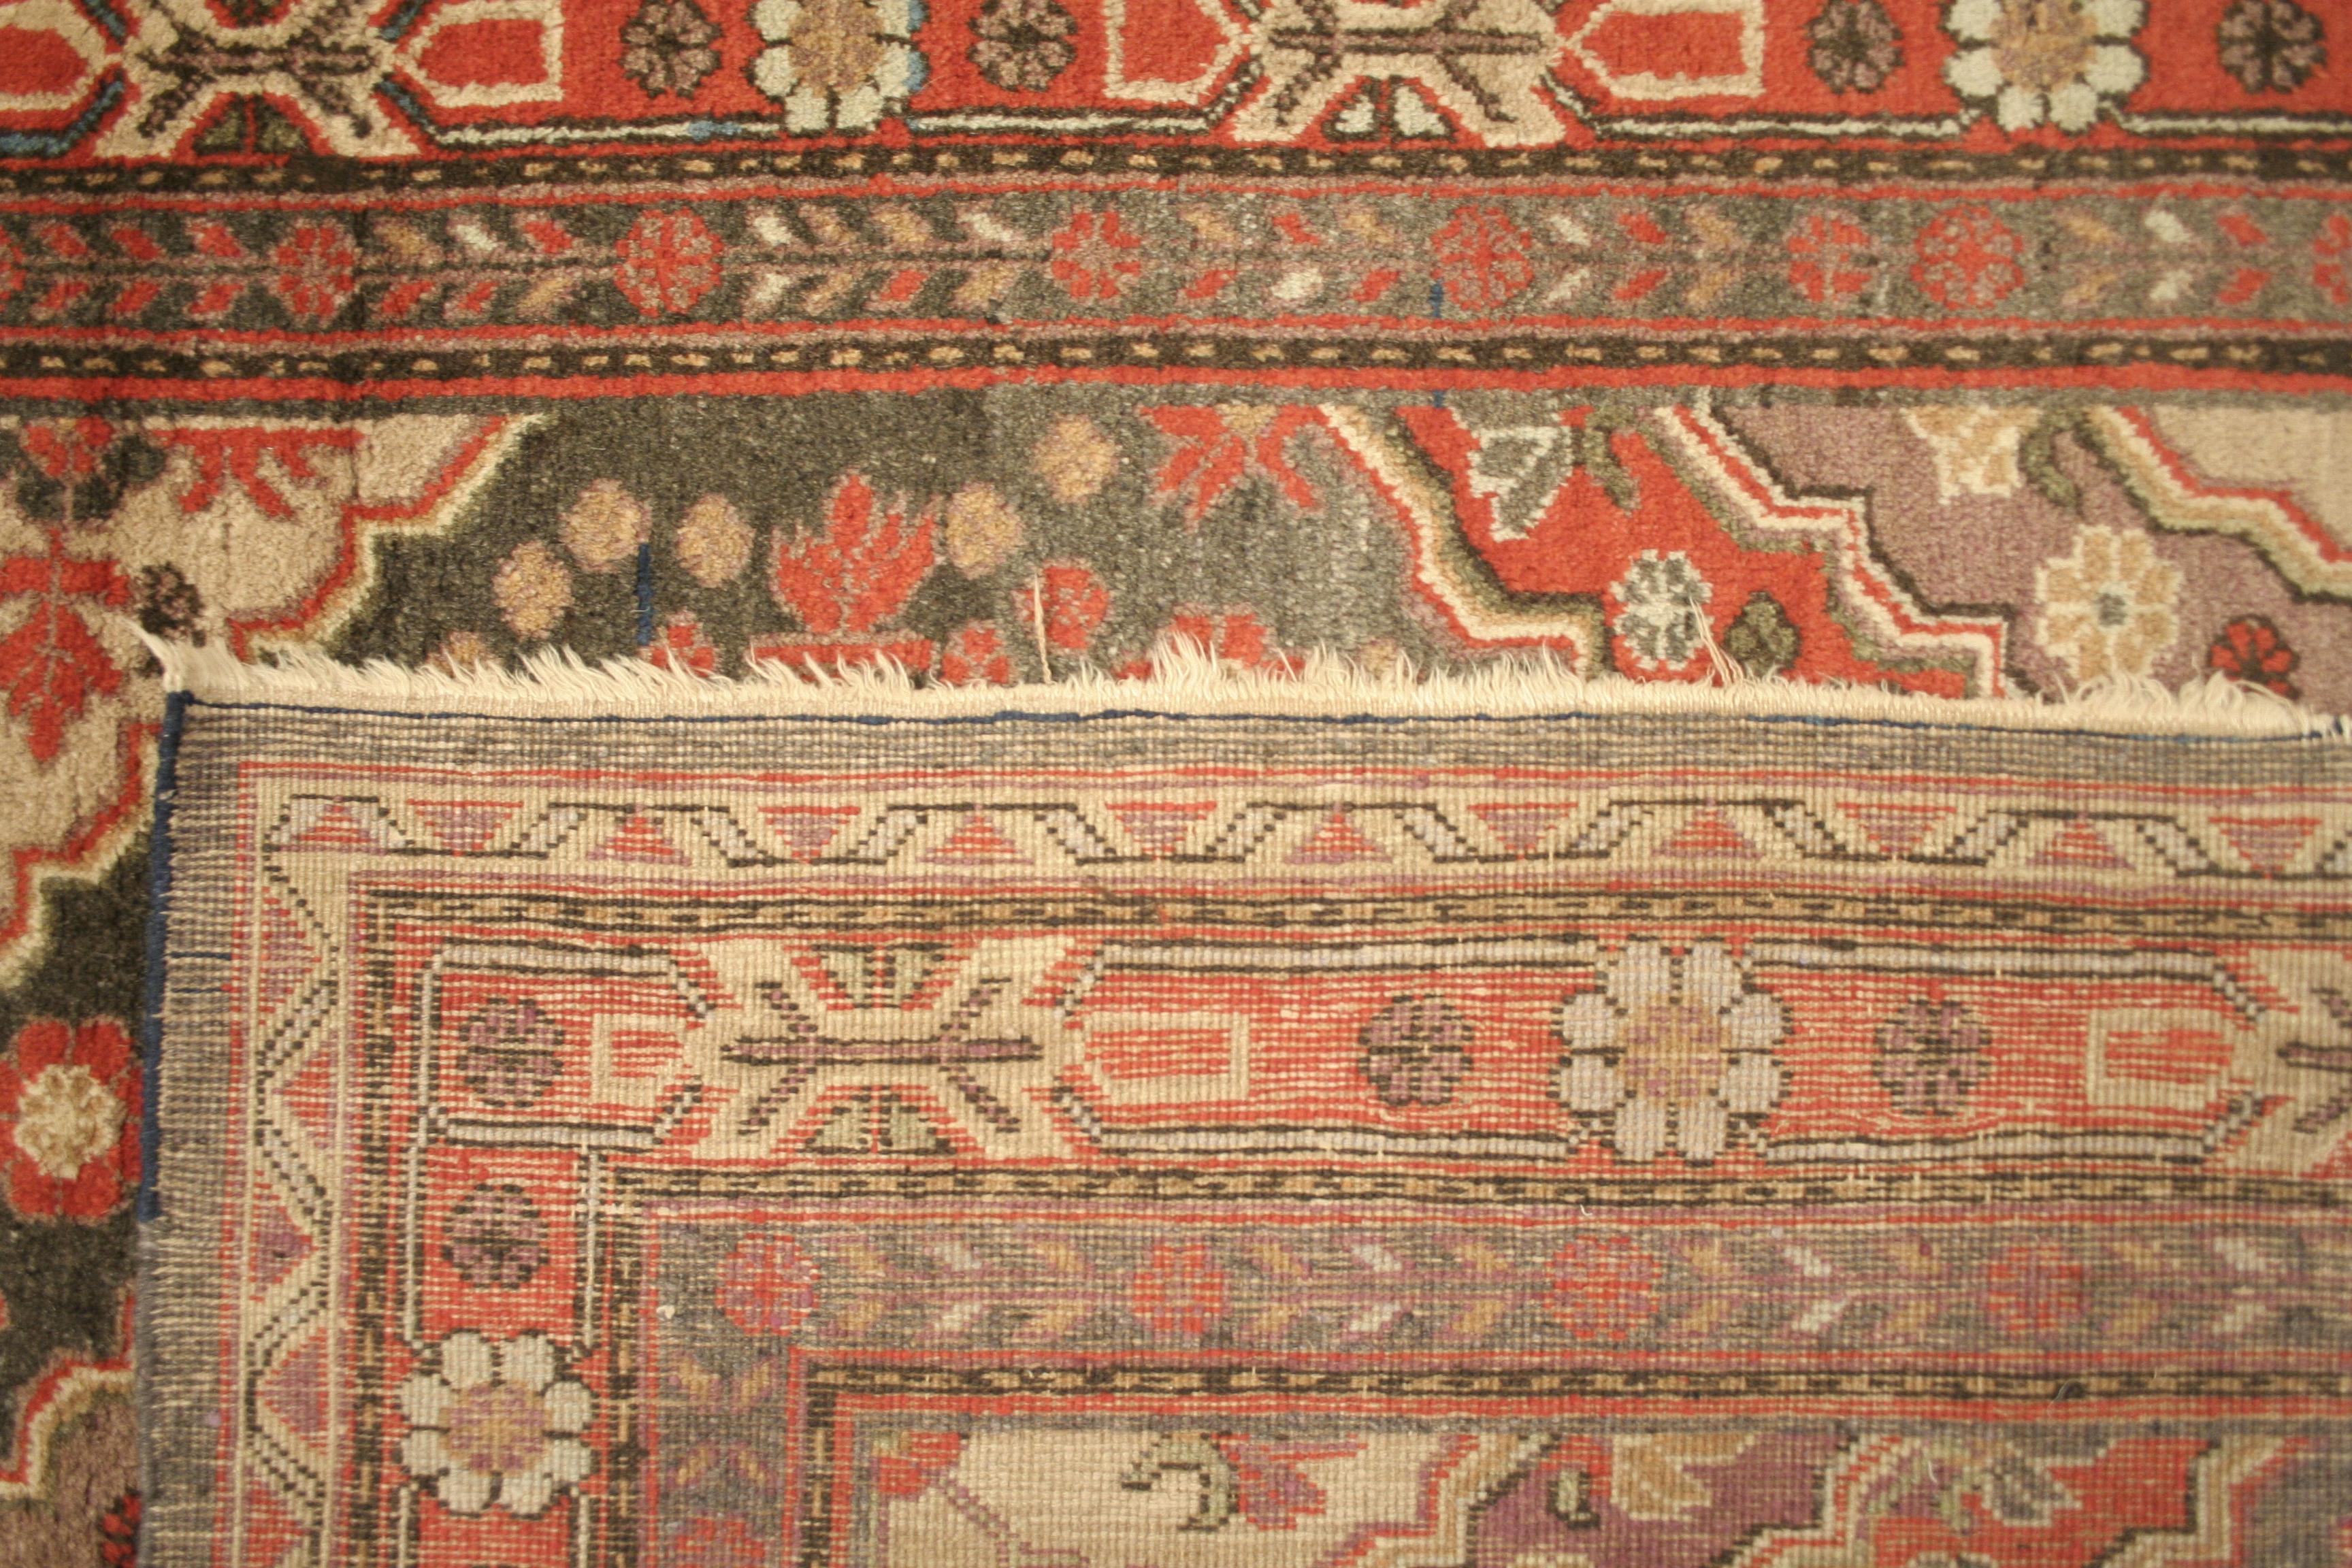 The great fascination of the carpets from eastern Turkestan, better known as Samarkands, is best explained in terms of the perfect balance between the force of the geometric design and the graceful eloquence of the curvilinear motifs. This unusual